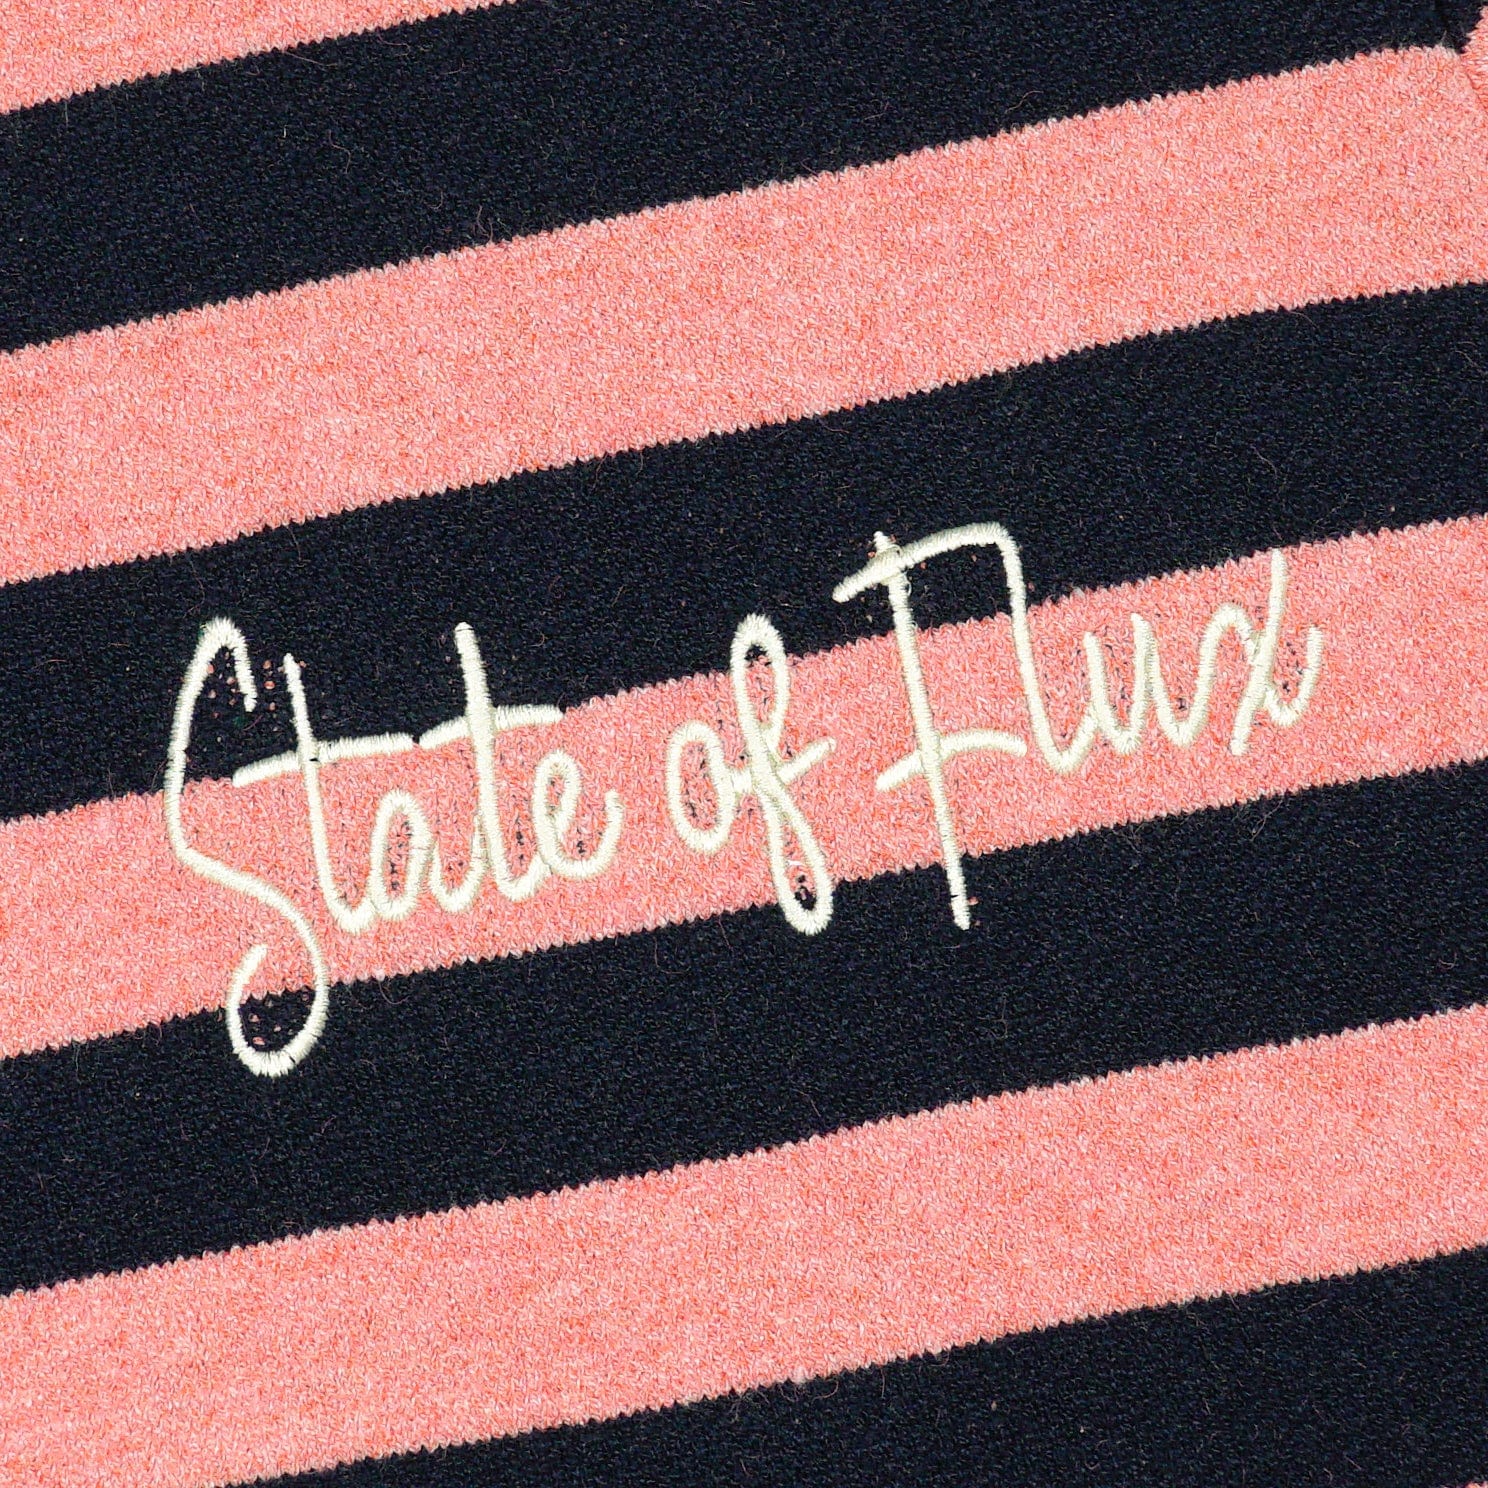 SOF Premium Striped Logo Knit Tee in rose and navy